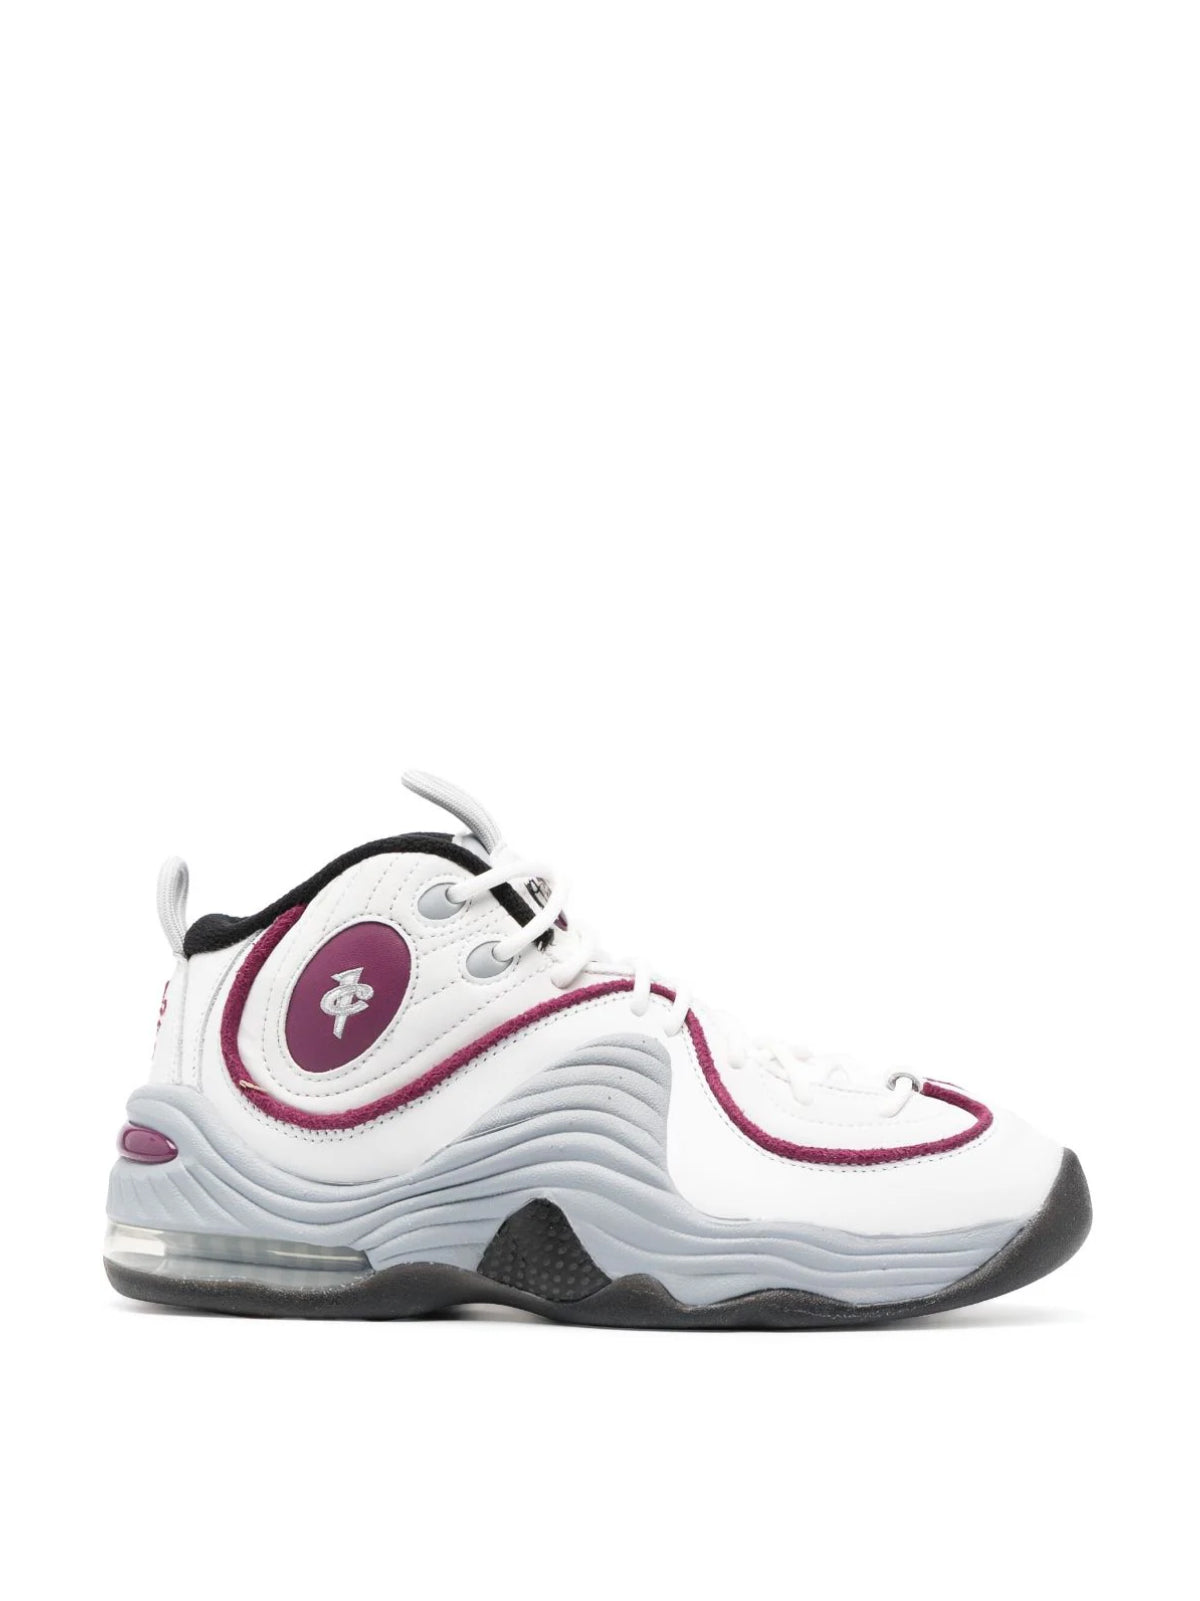 Nike-OUTLET-SALE-Air Penny II Sneakers-ARCHIVIST